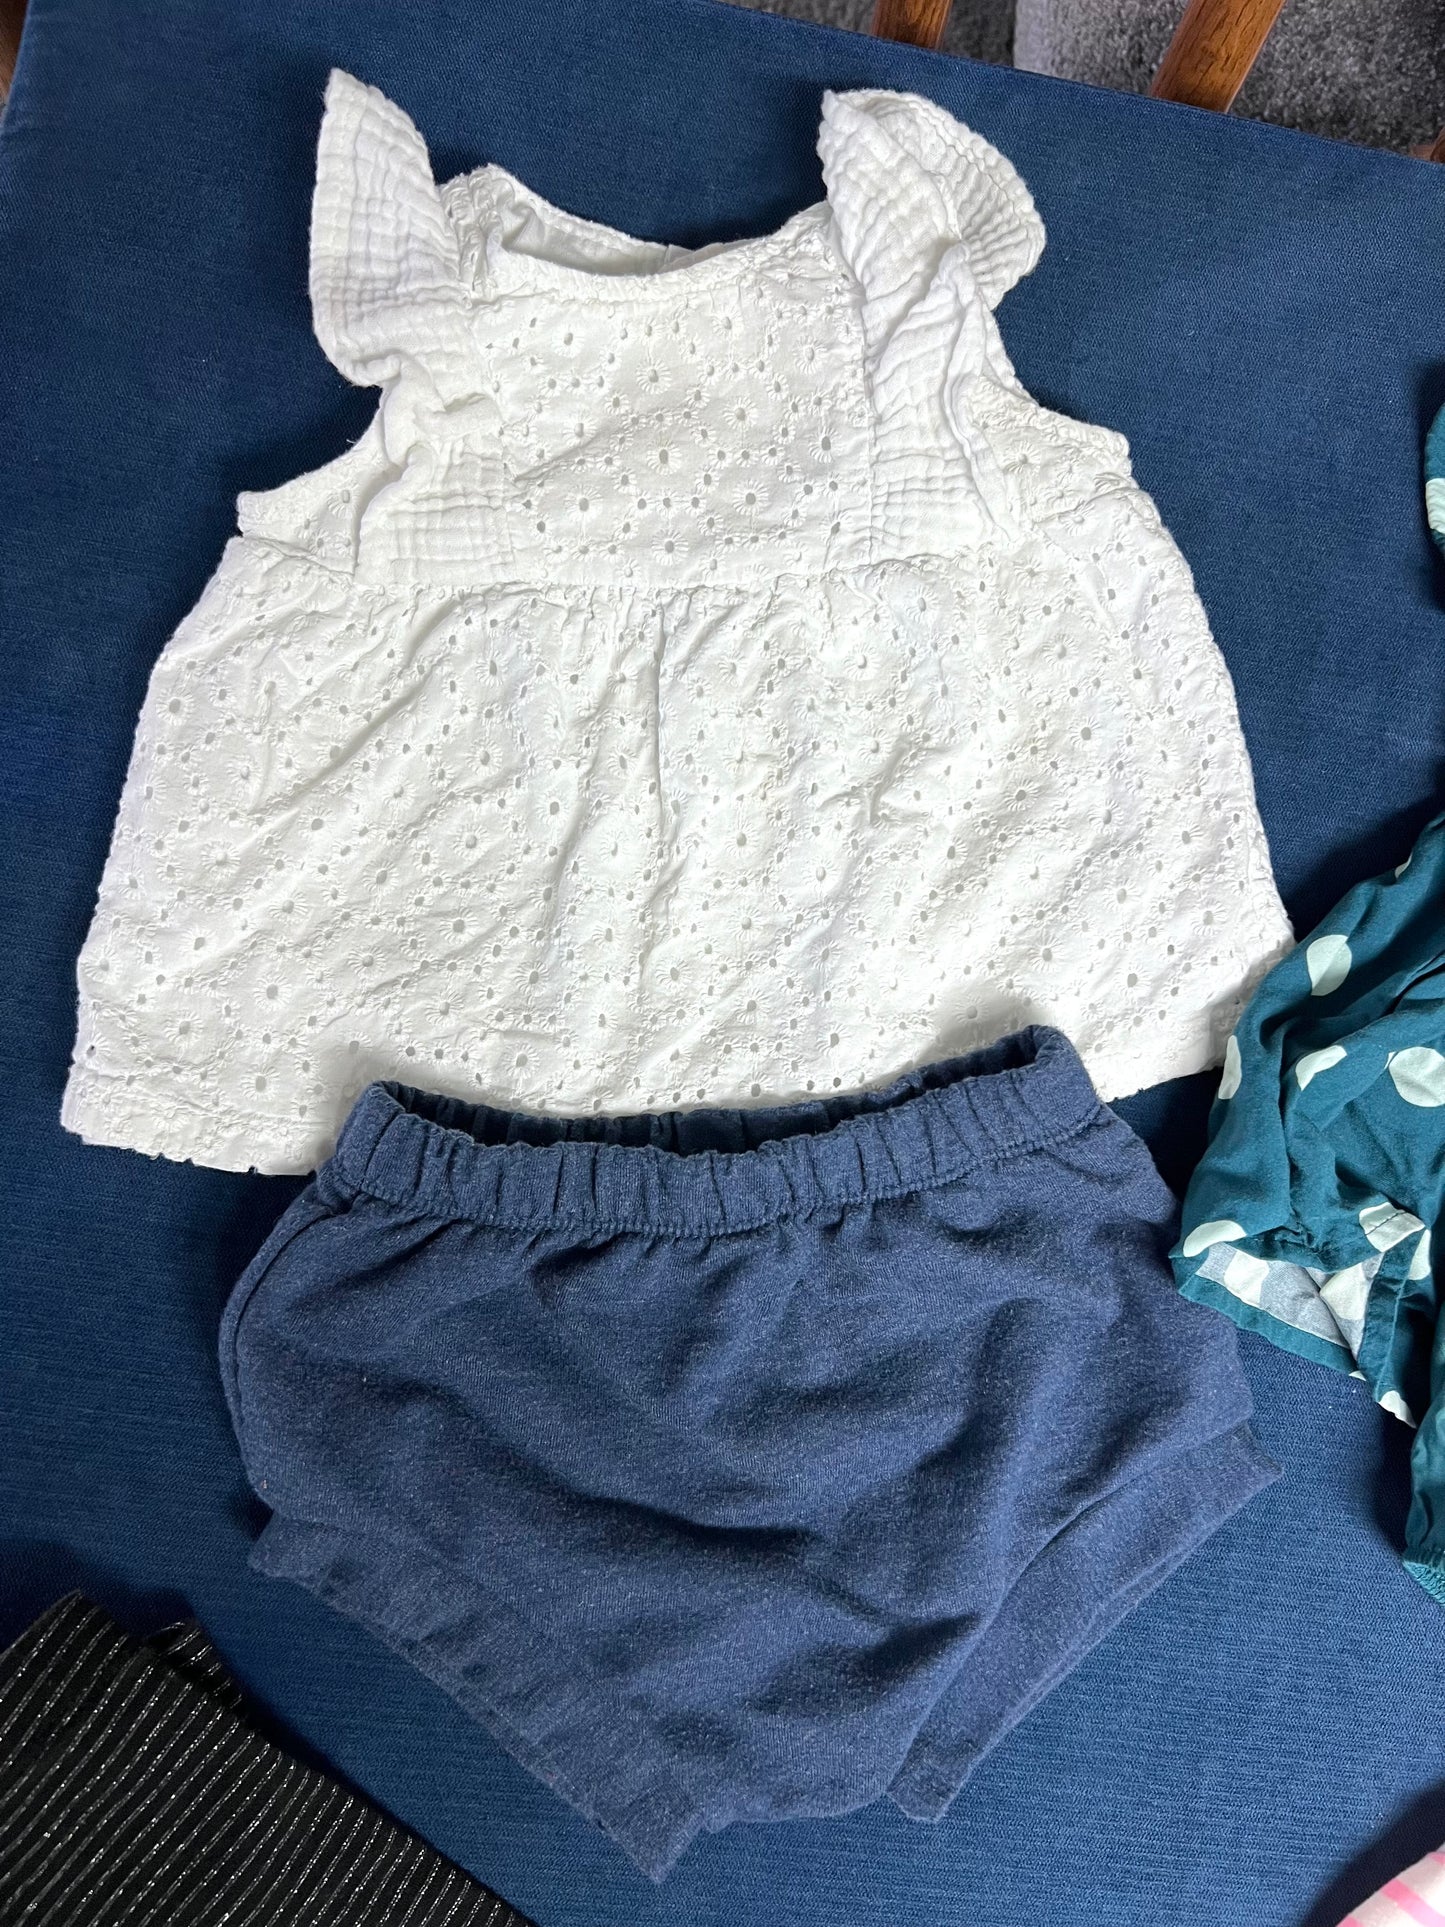 12mo baby girl bundle: black/silver leggings, navy shorties, white eyelet top with ruffle shoulders, teal polka dot dress with diaper cover, pink/cream striped shirt